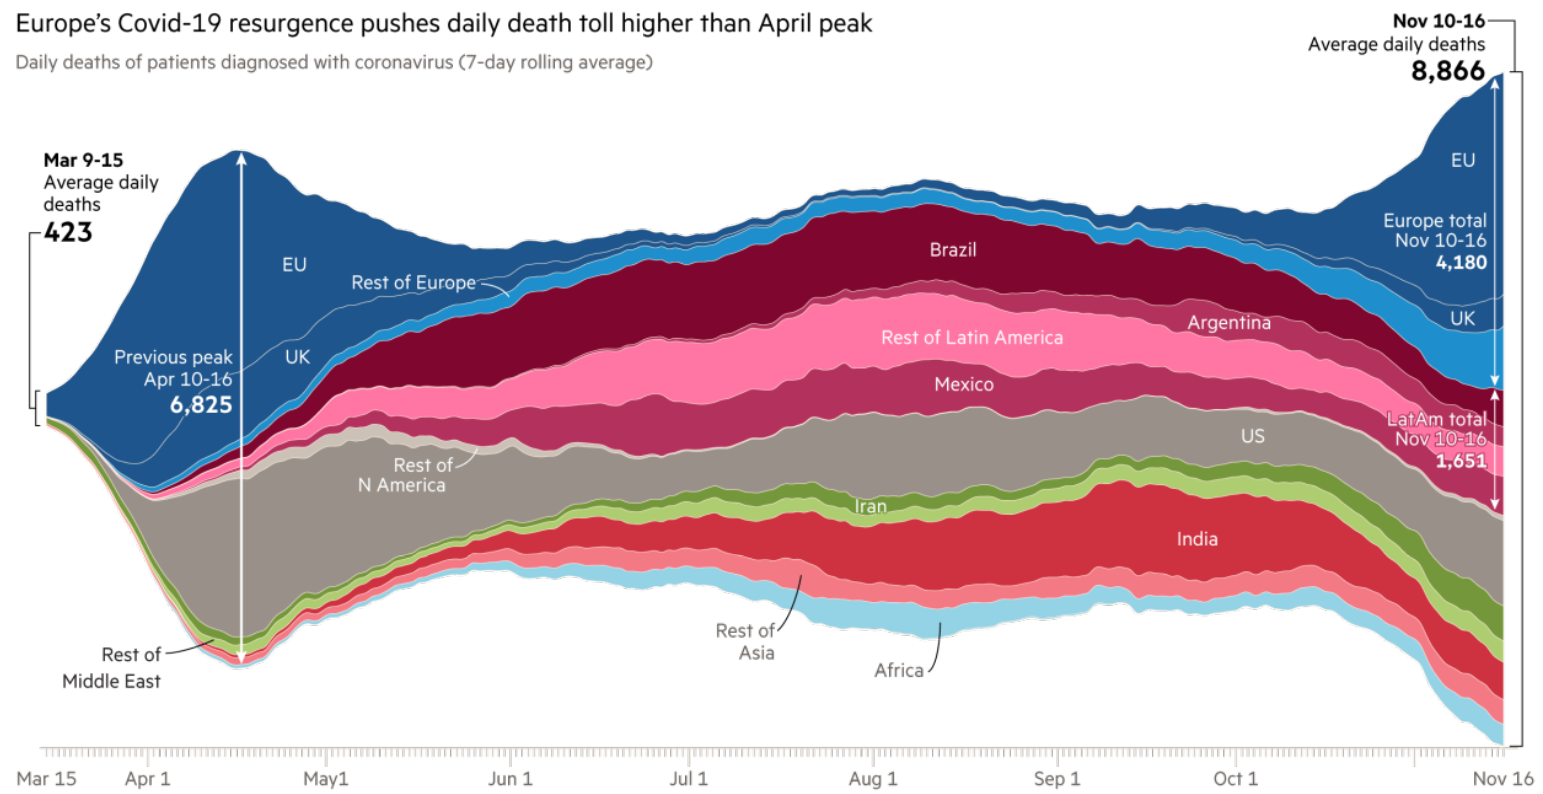 FT global daily death chart to 16-11-2020 - enlarge